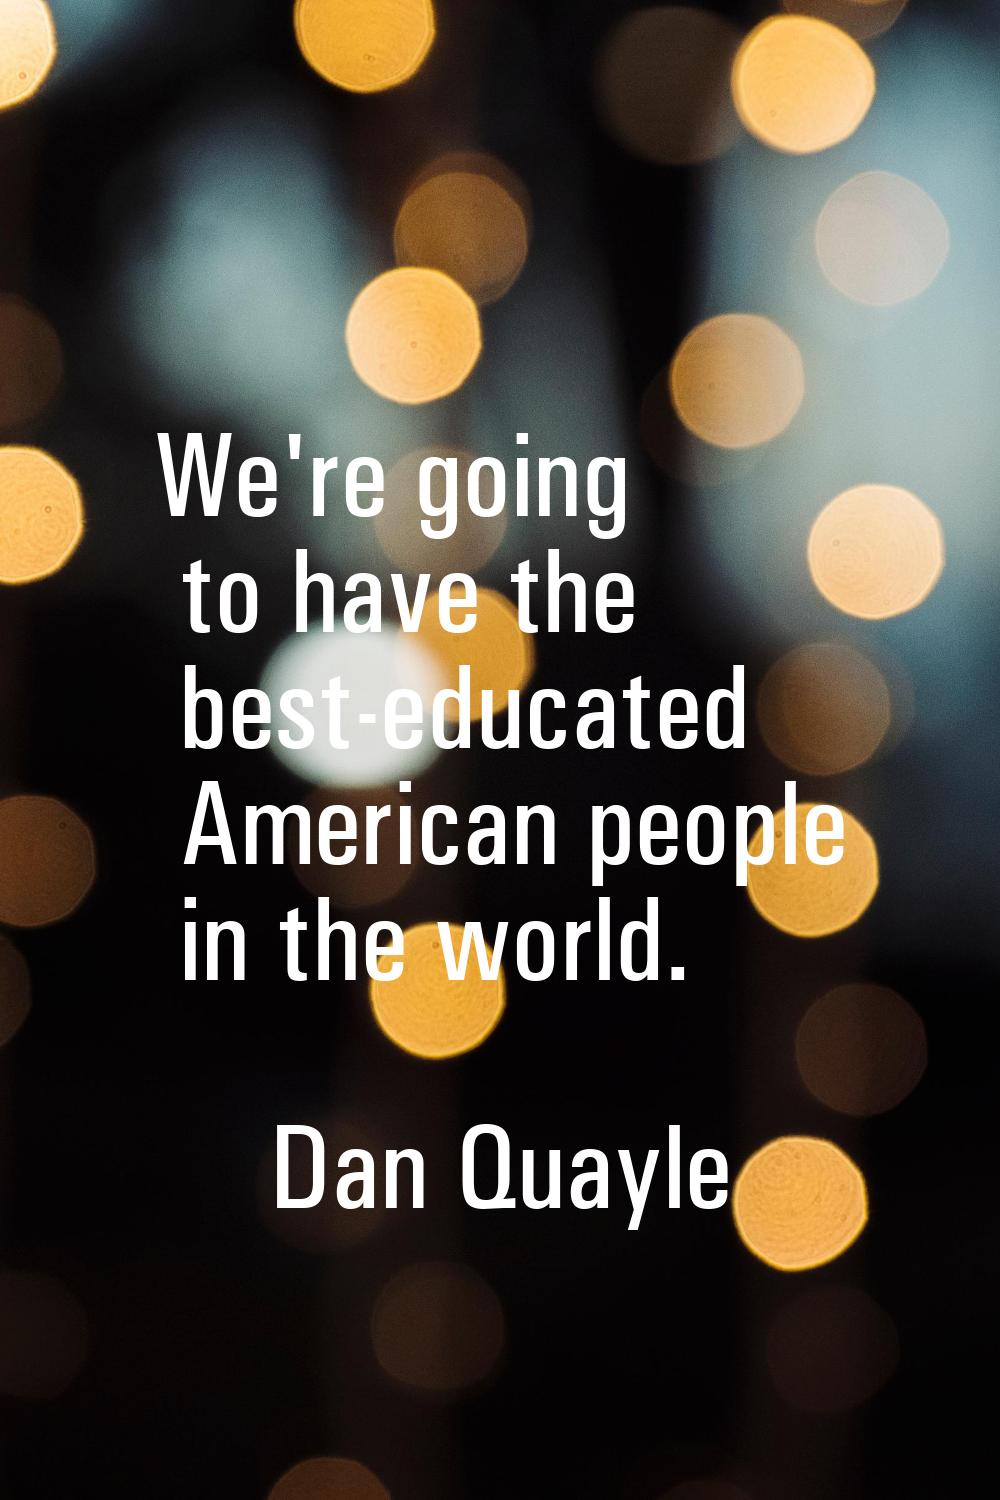 We're going to have the best-educated American people in the world.